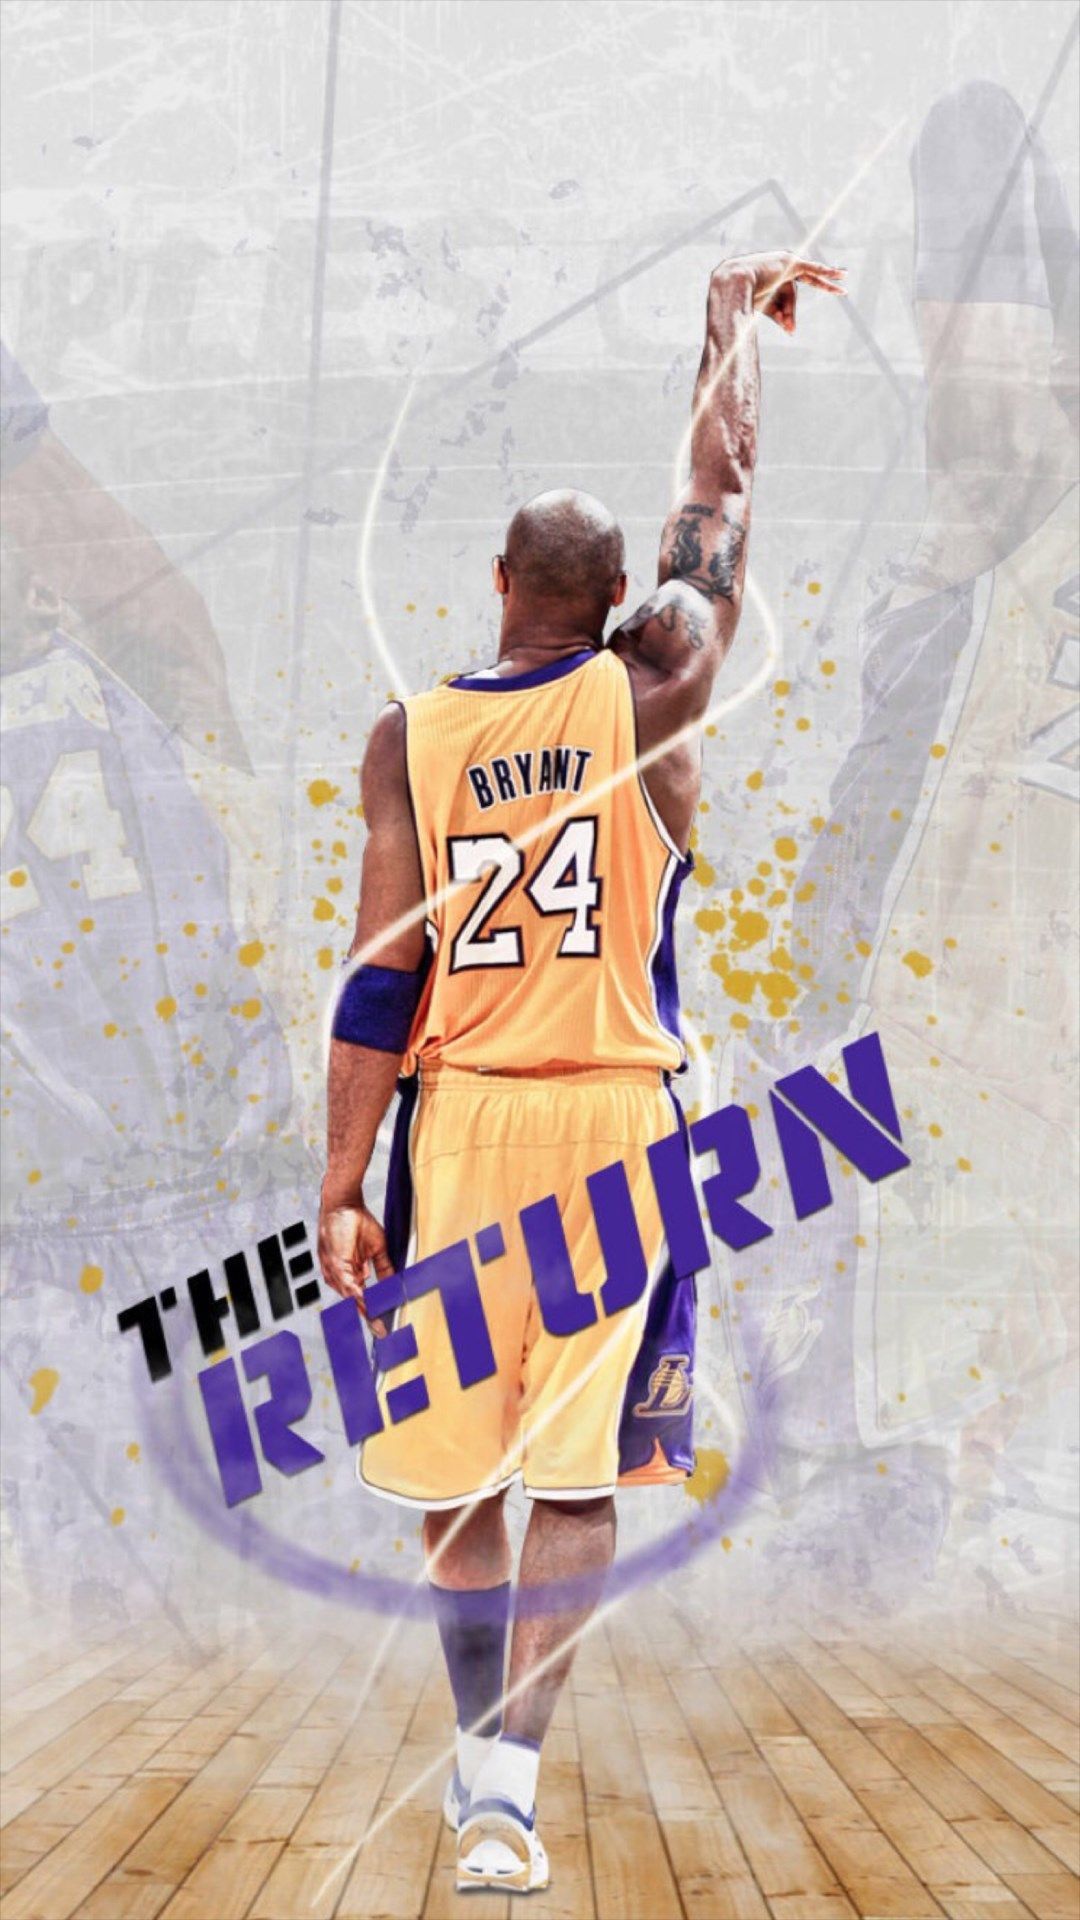 Free download the Bryant Kobe NBA Sports Super Star wallpaper , beaty your iphone. #sports #board. Kobe bryant wallpaper, Lakers kobe bryant, Kobe bryant picture